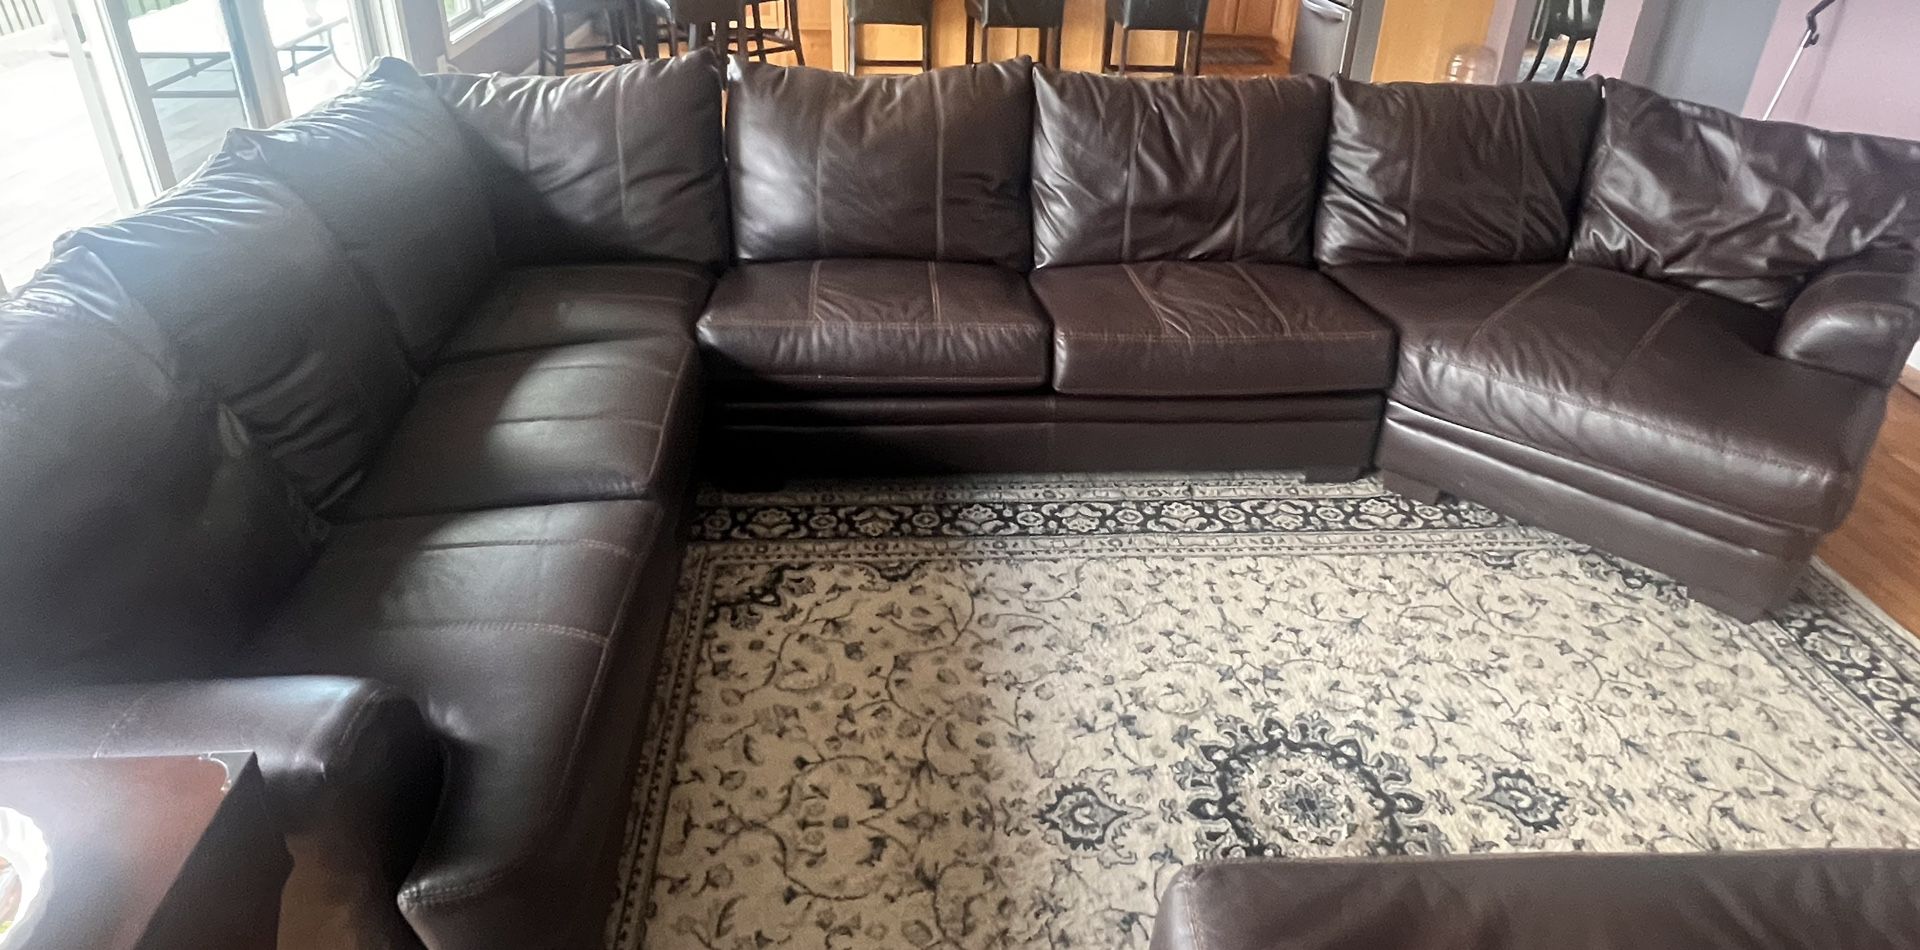 Huge Sectional Couch For Sale